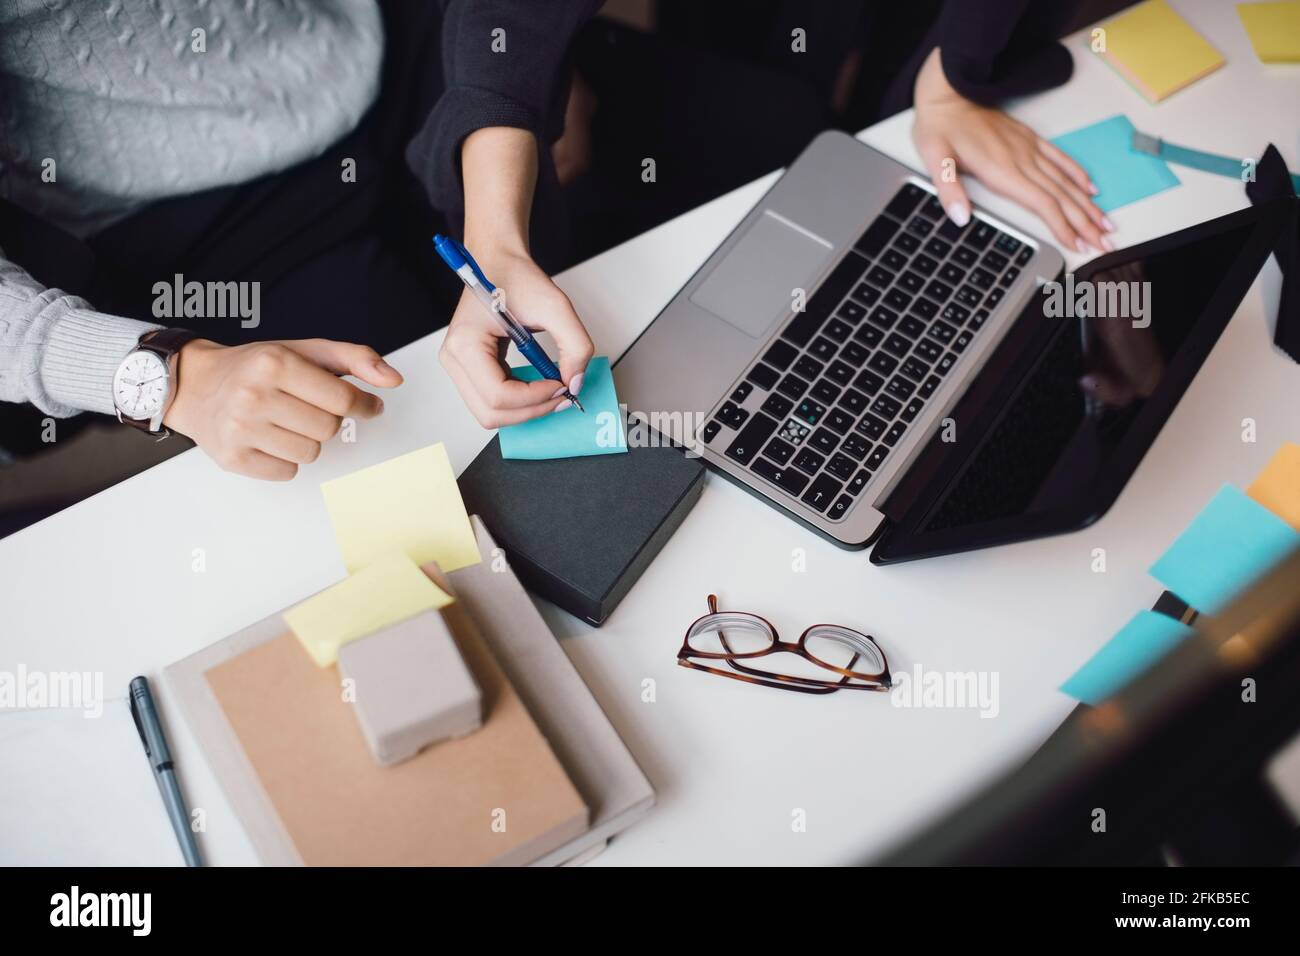 Cropped hand of businesswoman writing on adhesive note by laptop at desk in office Stock Photo